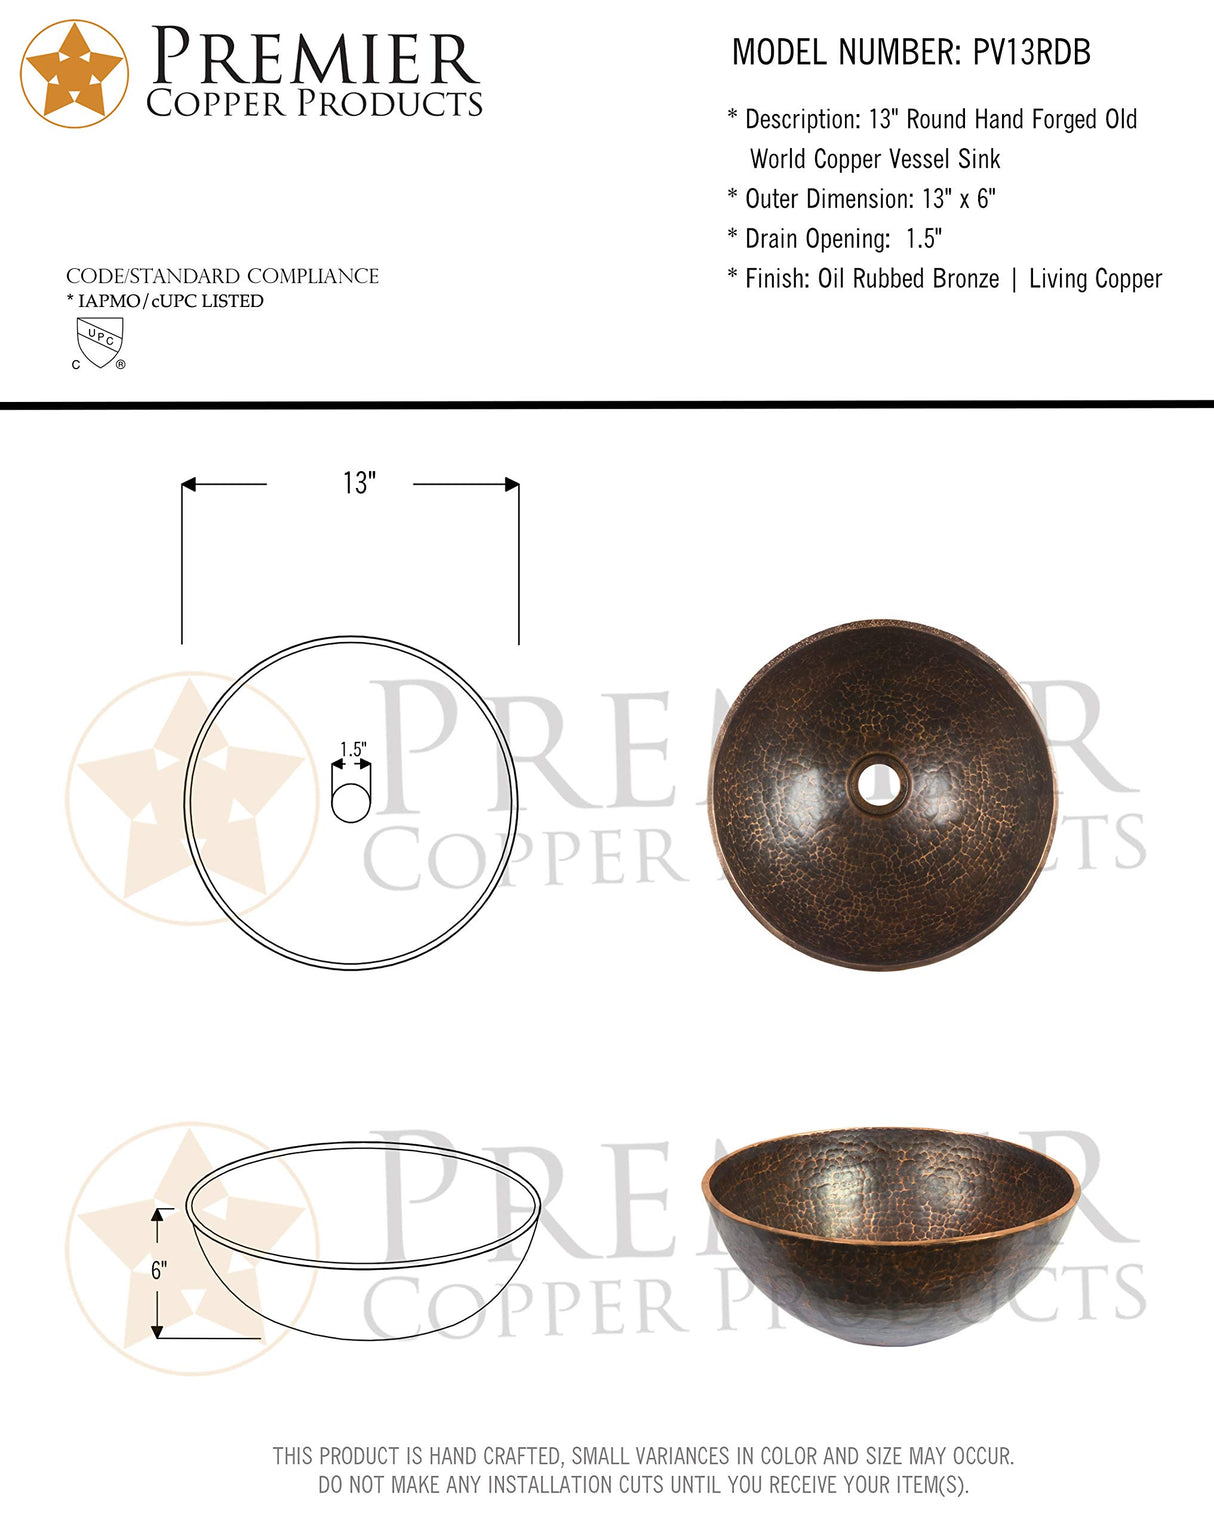 Premier Copper Products PV13RDB 13-Inch Round Hand Forged Old World Copper Vessel Sink